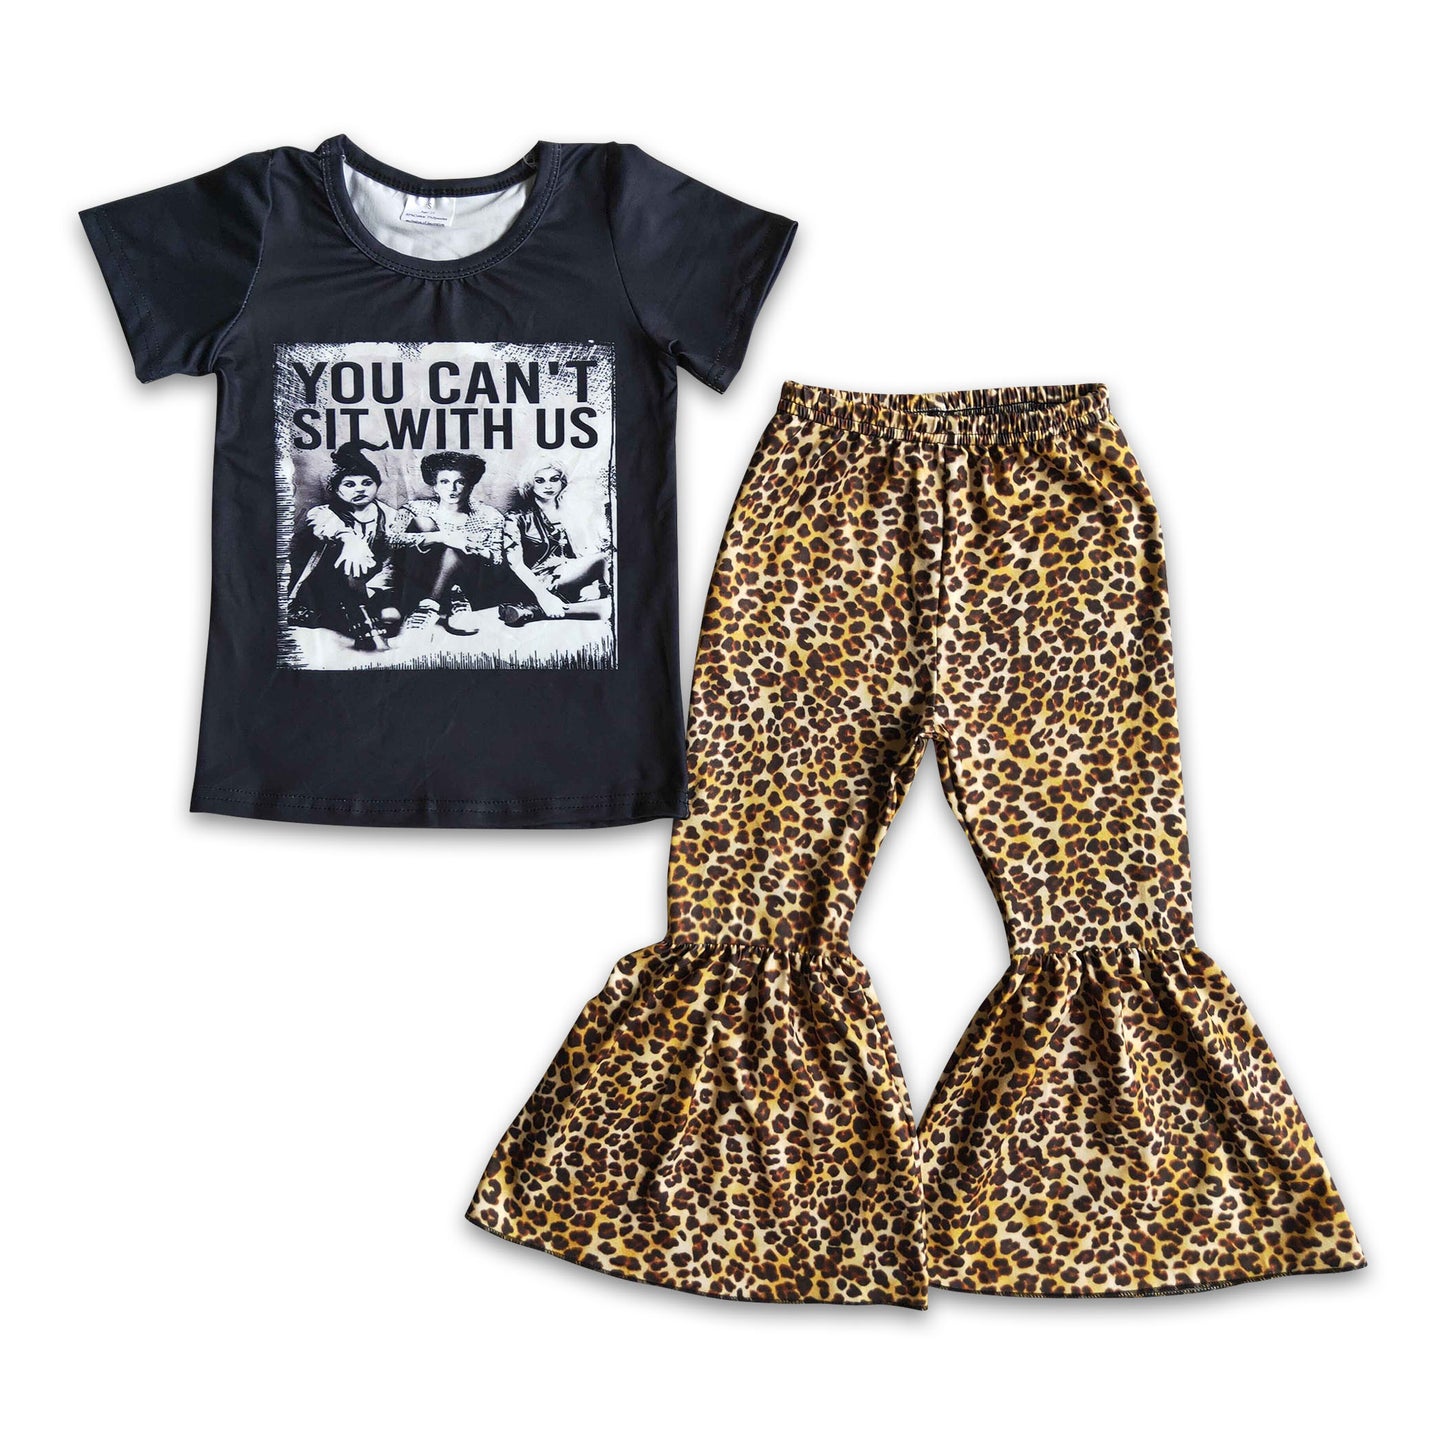 You can't sit with us witches leopard girls Halloween outfit